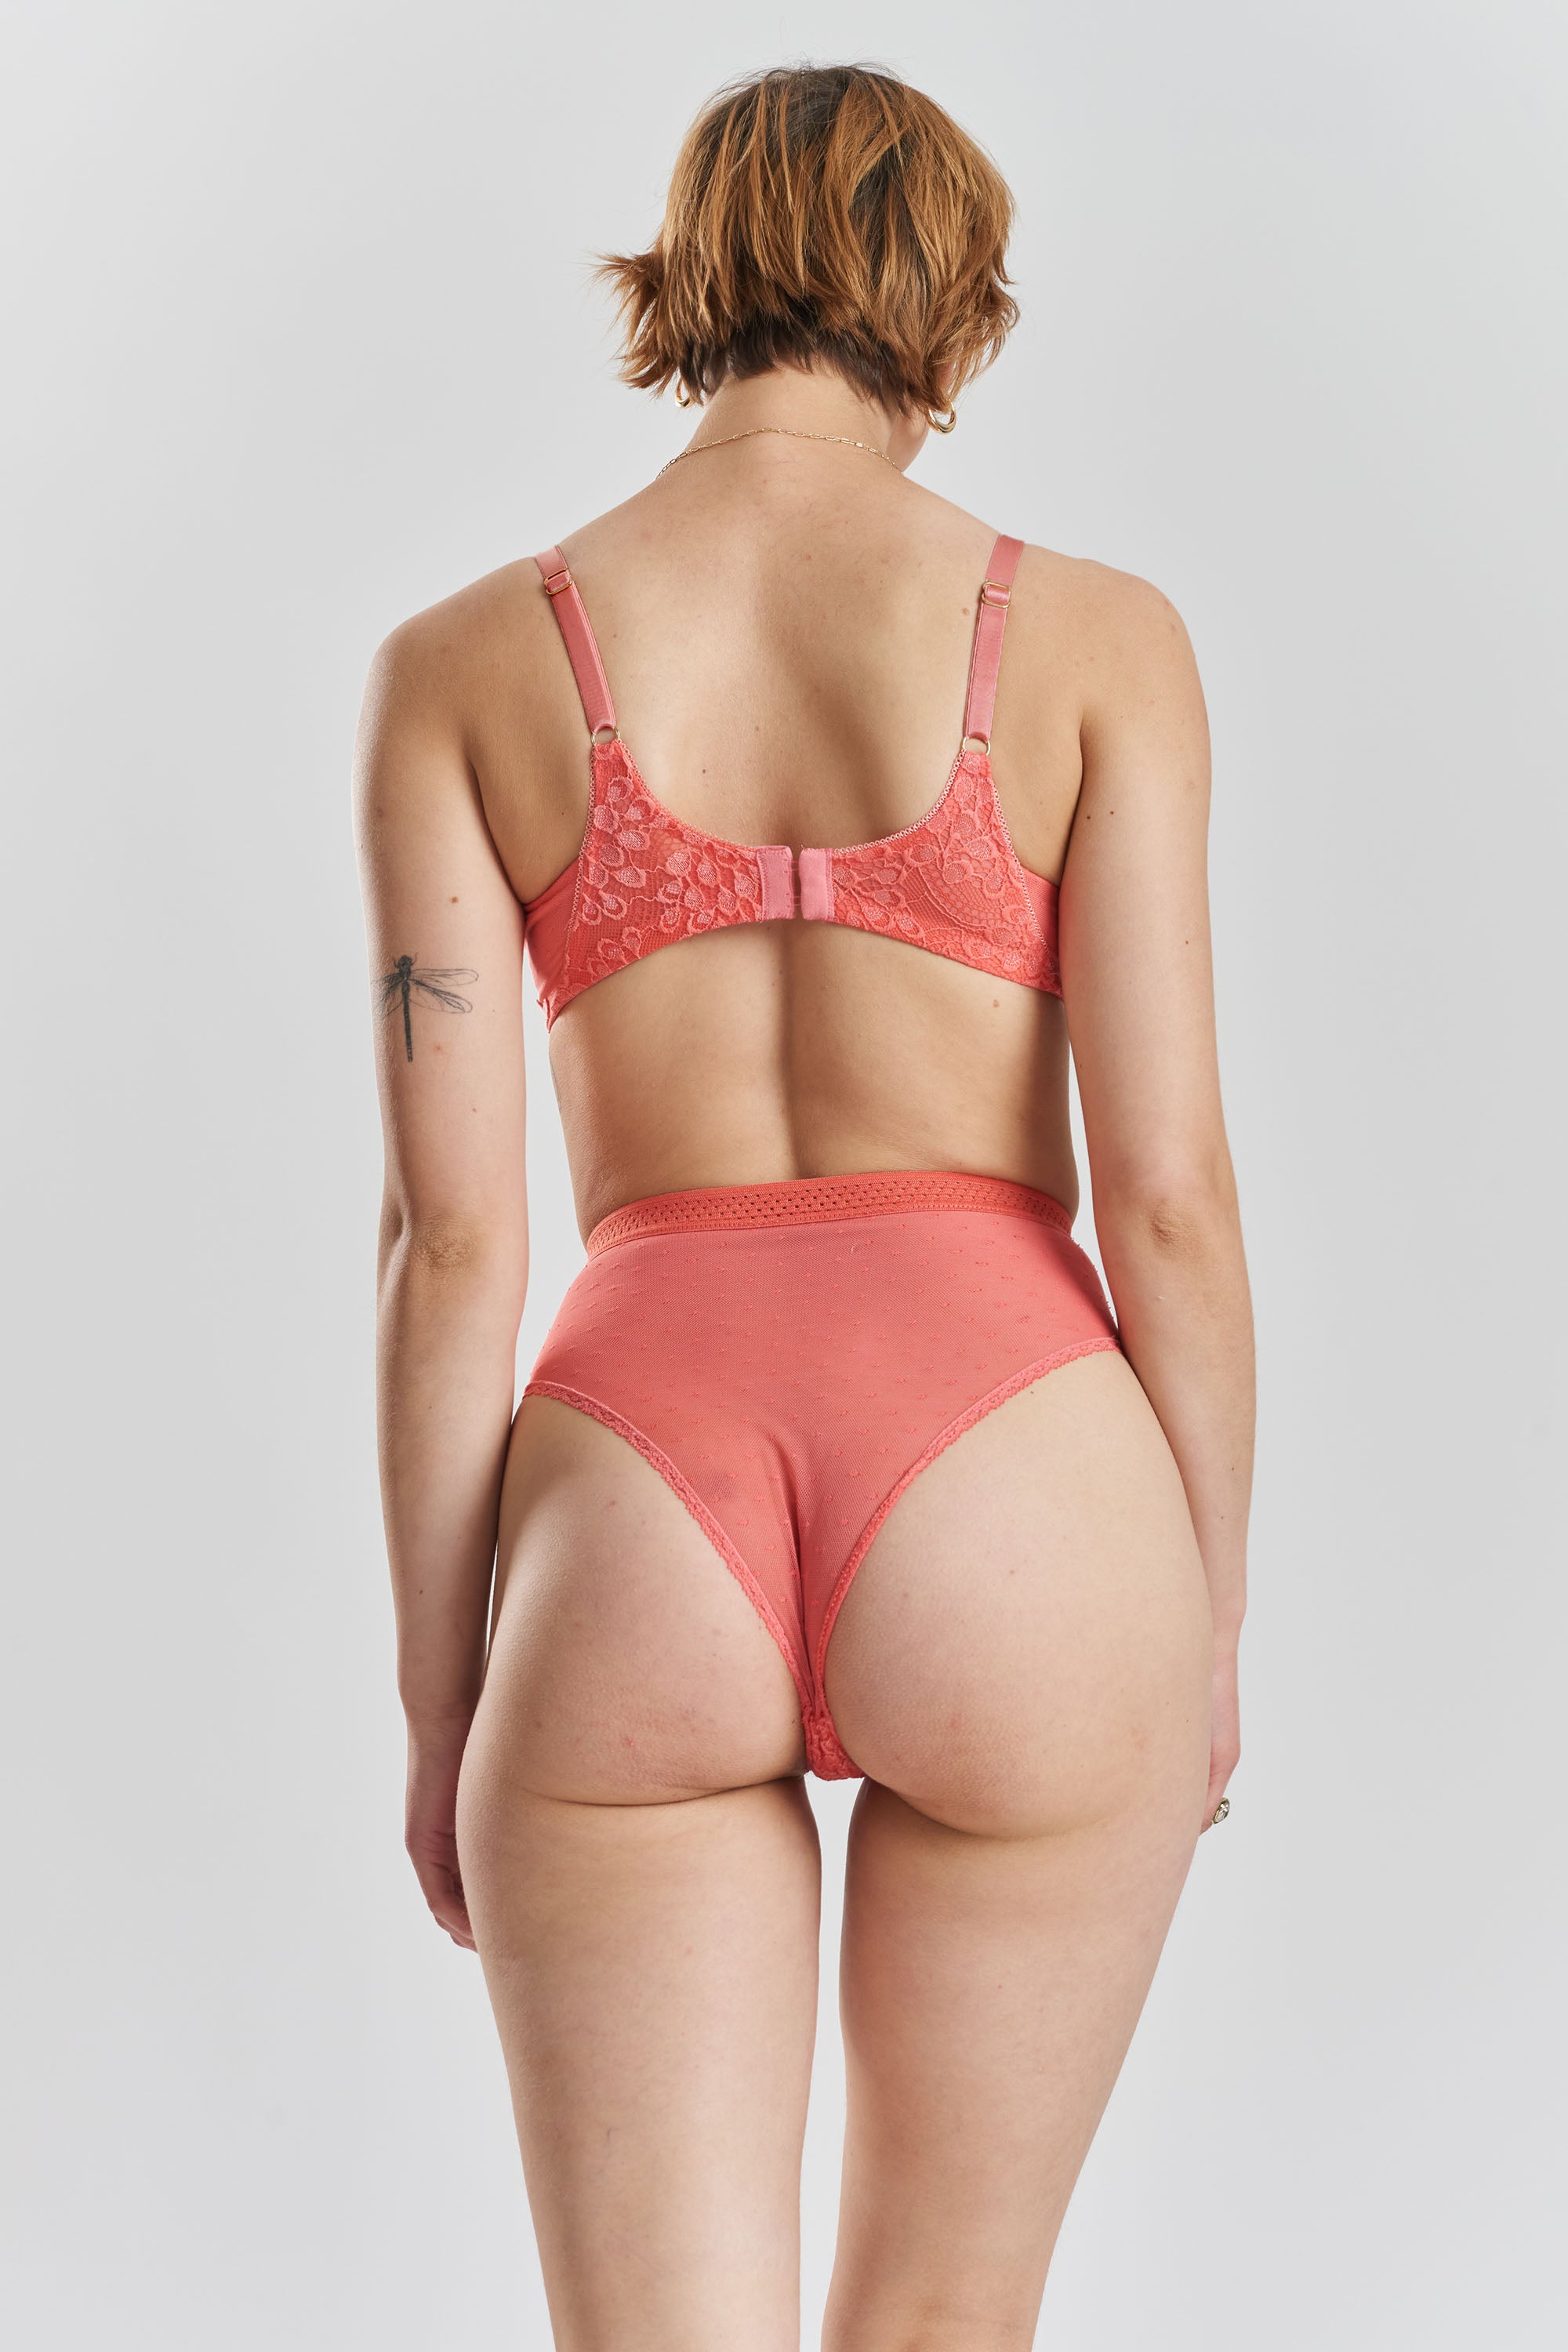 Betula Recycled-Tulle Underwired Balconette Bra - Dawnlight Coral, Peachaus